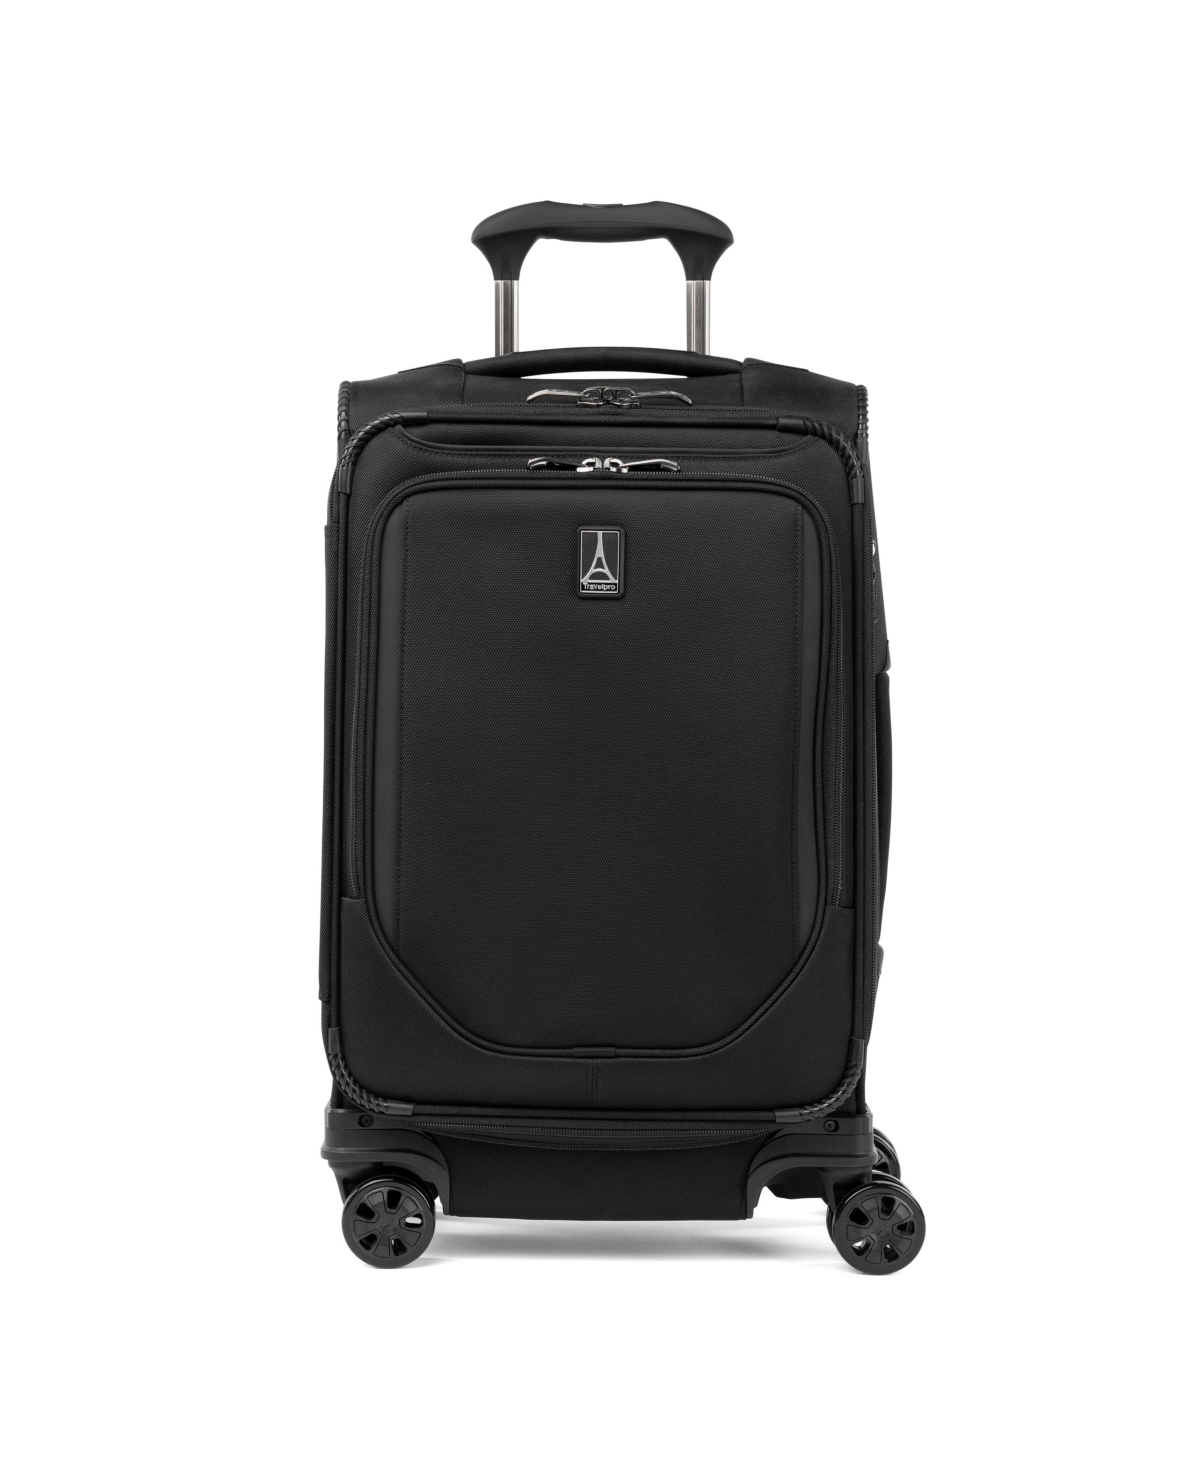 Travelpro Crew Classic Carry-on Expandable Rollaboard Luggage In Jet Black